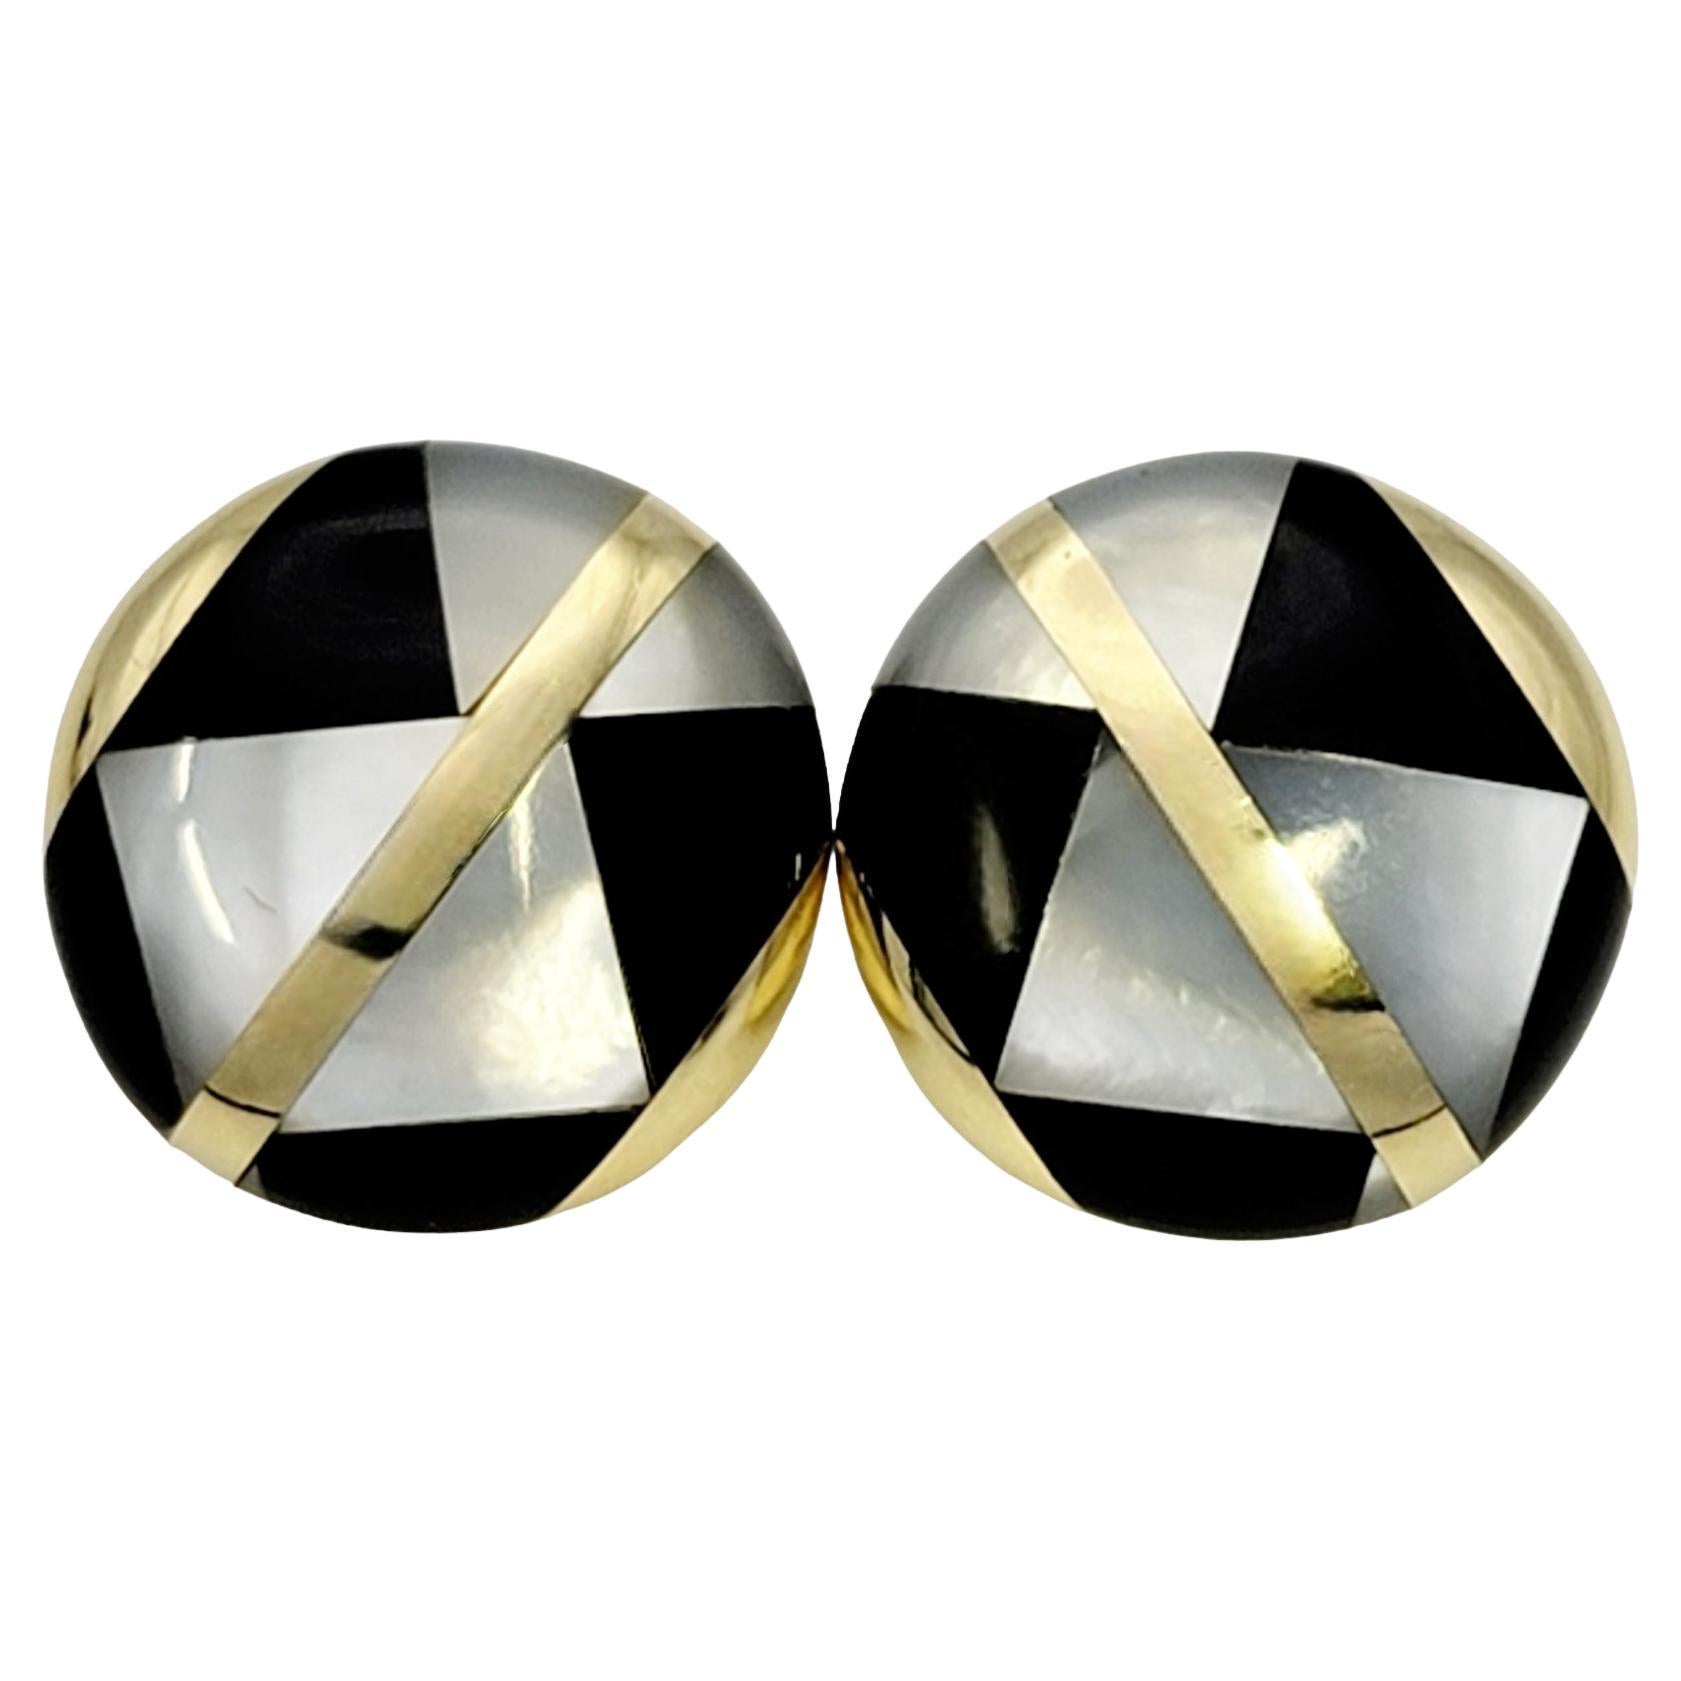 Stunning vintage earrings from Tiffany & Co.. These stylish designer earrings are made of luxurious 18 karat yellow gold and feature a geometric pattern made of Mother of Pearl and black onyx. The perfect button shape clips snugly to the ear,